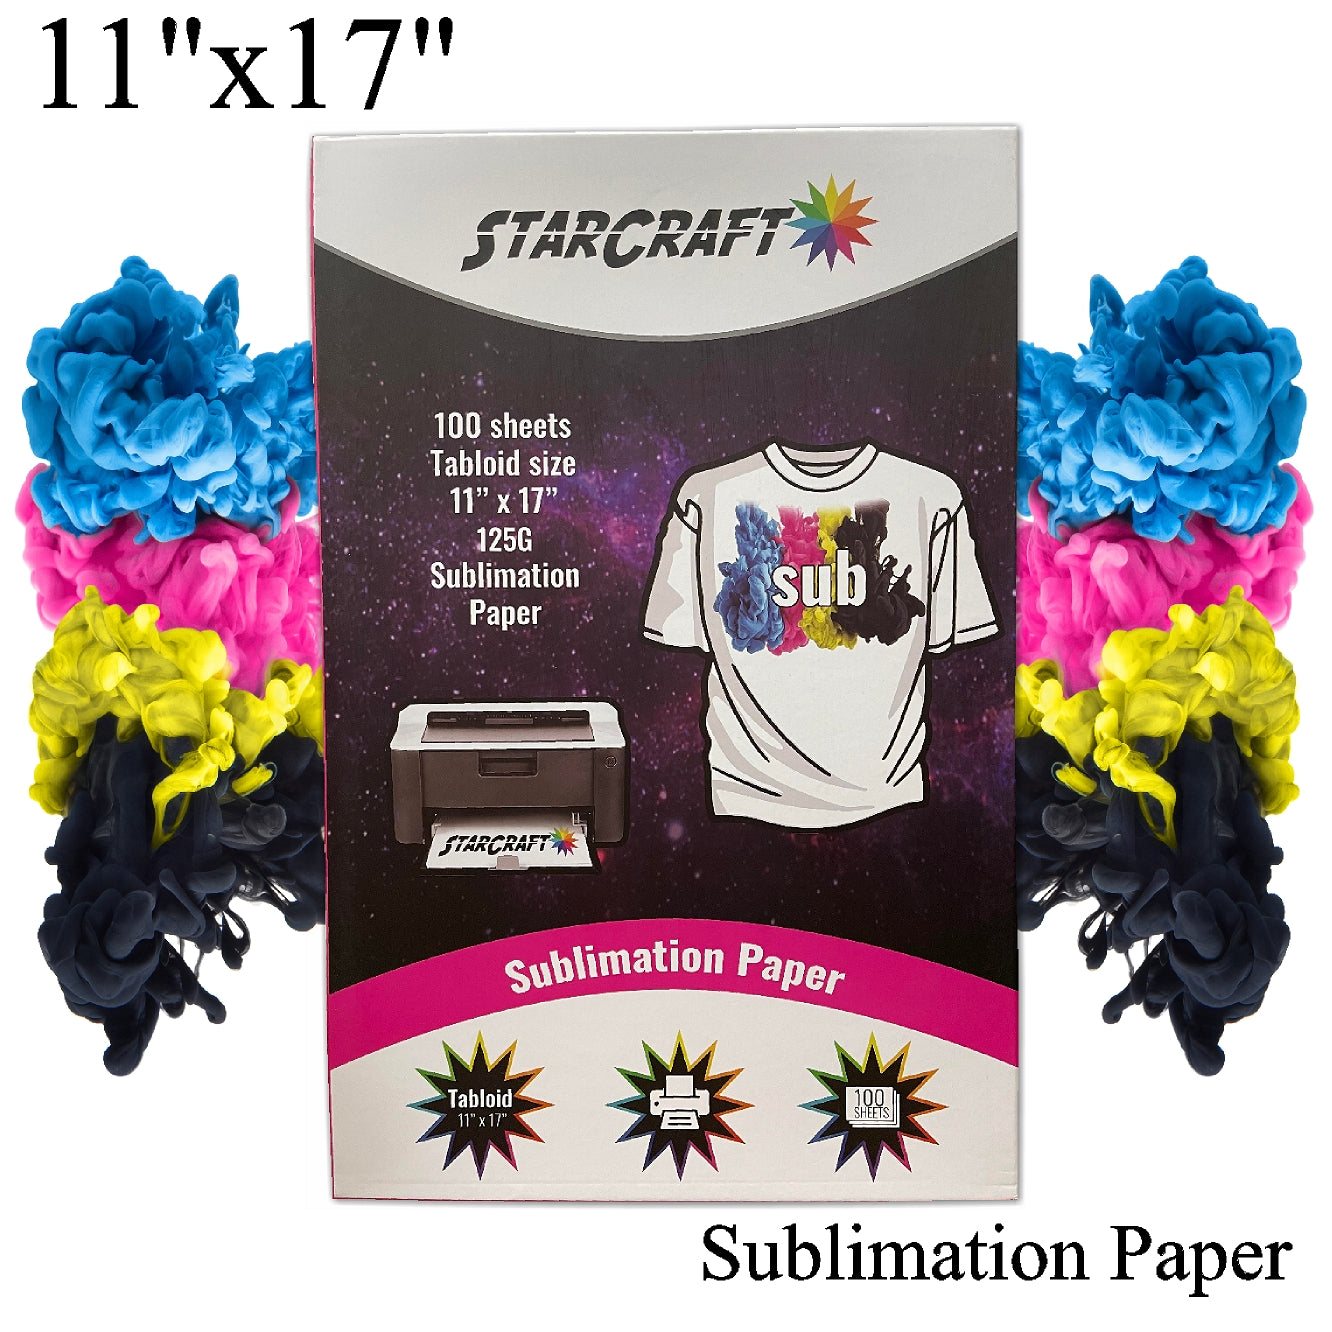 Texprint R Sublimation Transfer Paper 11 X 17 FREE SHIPPING 